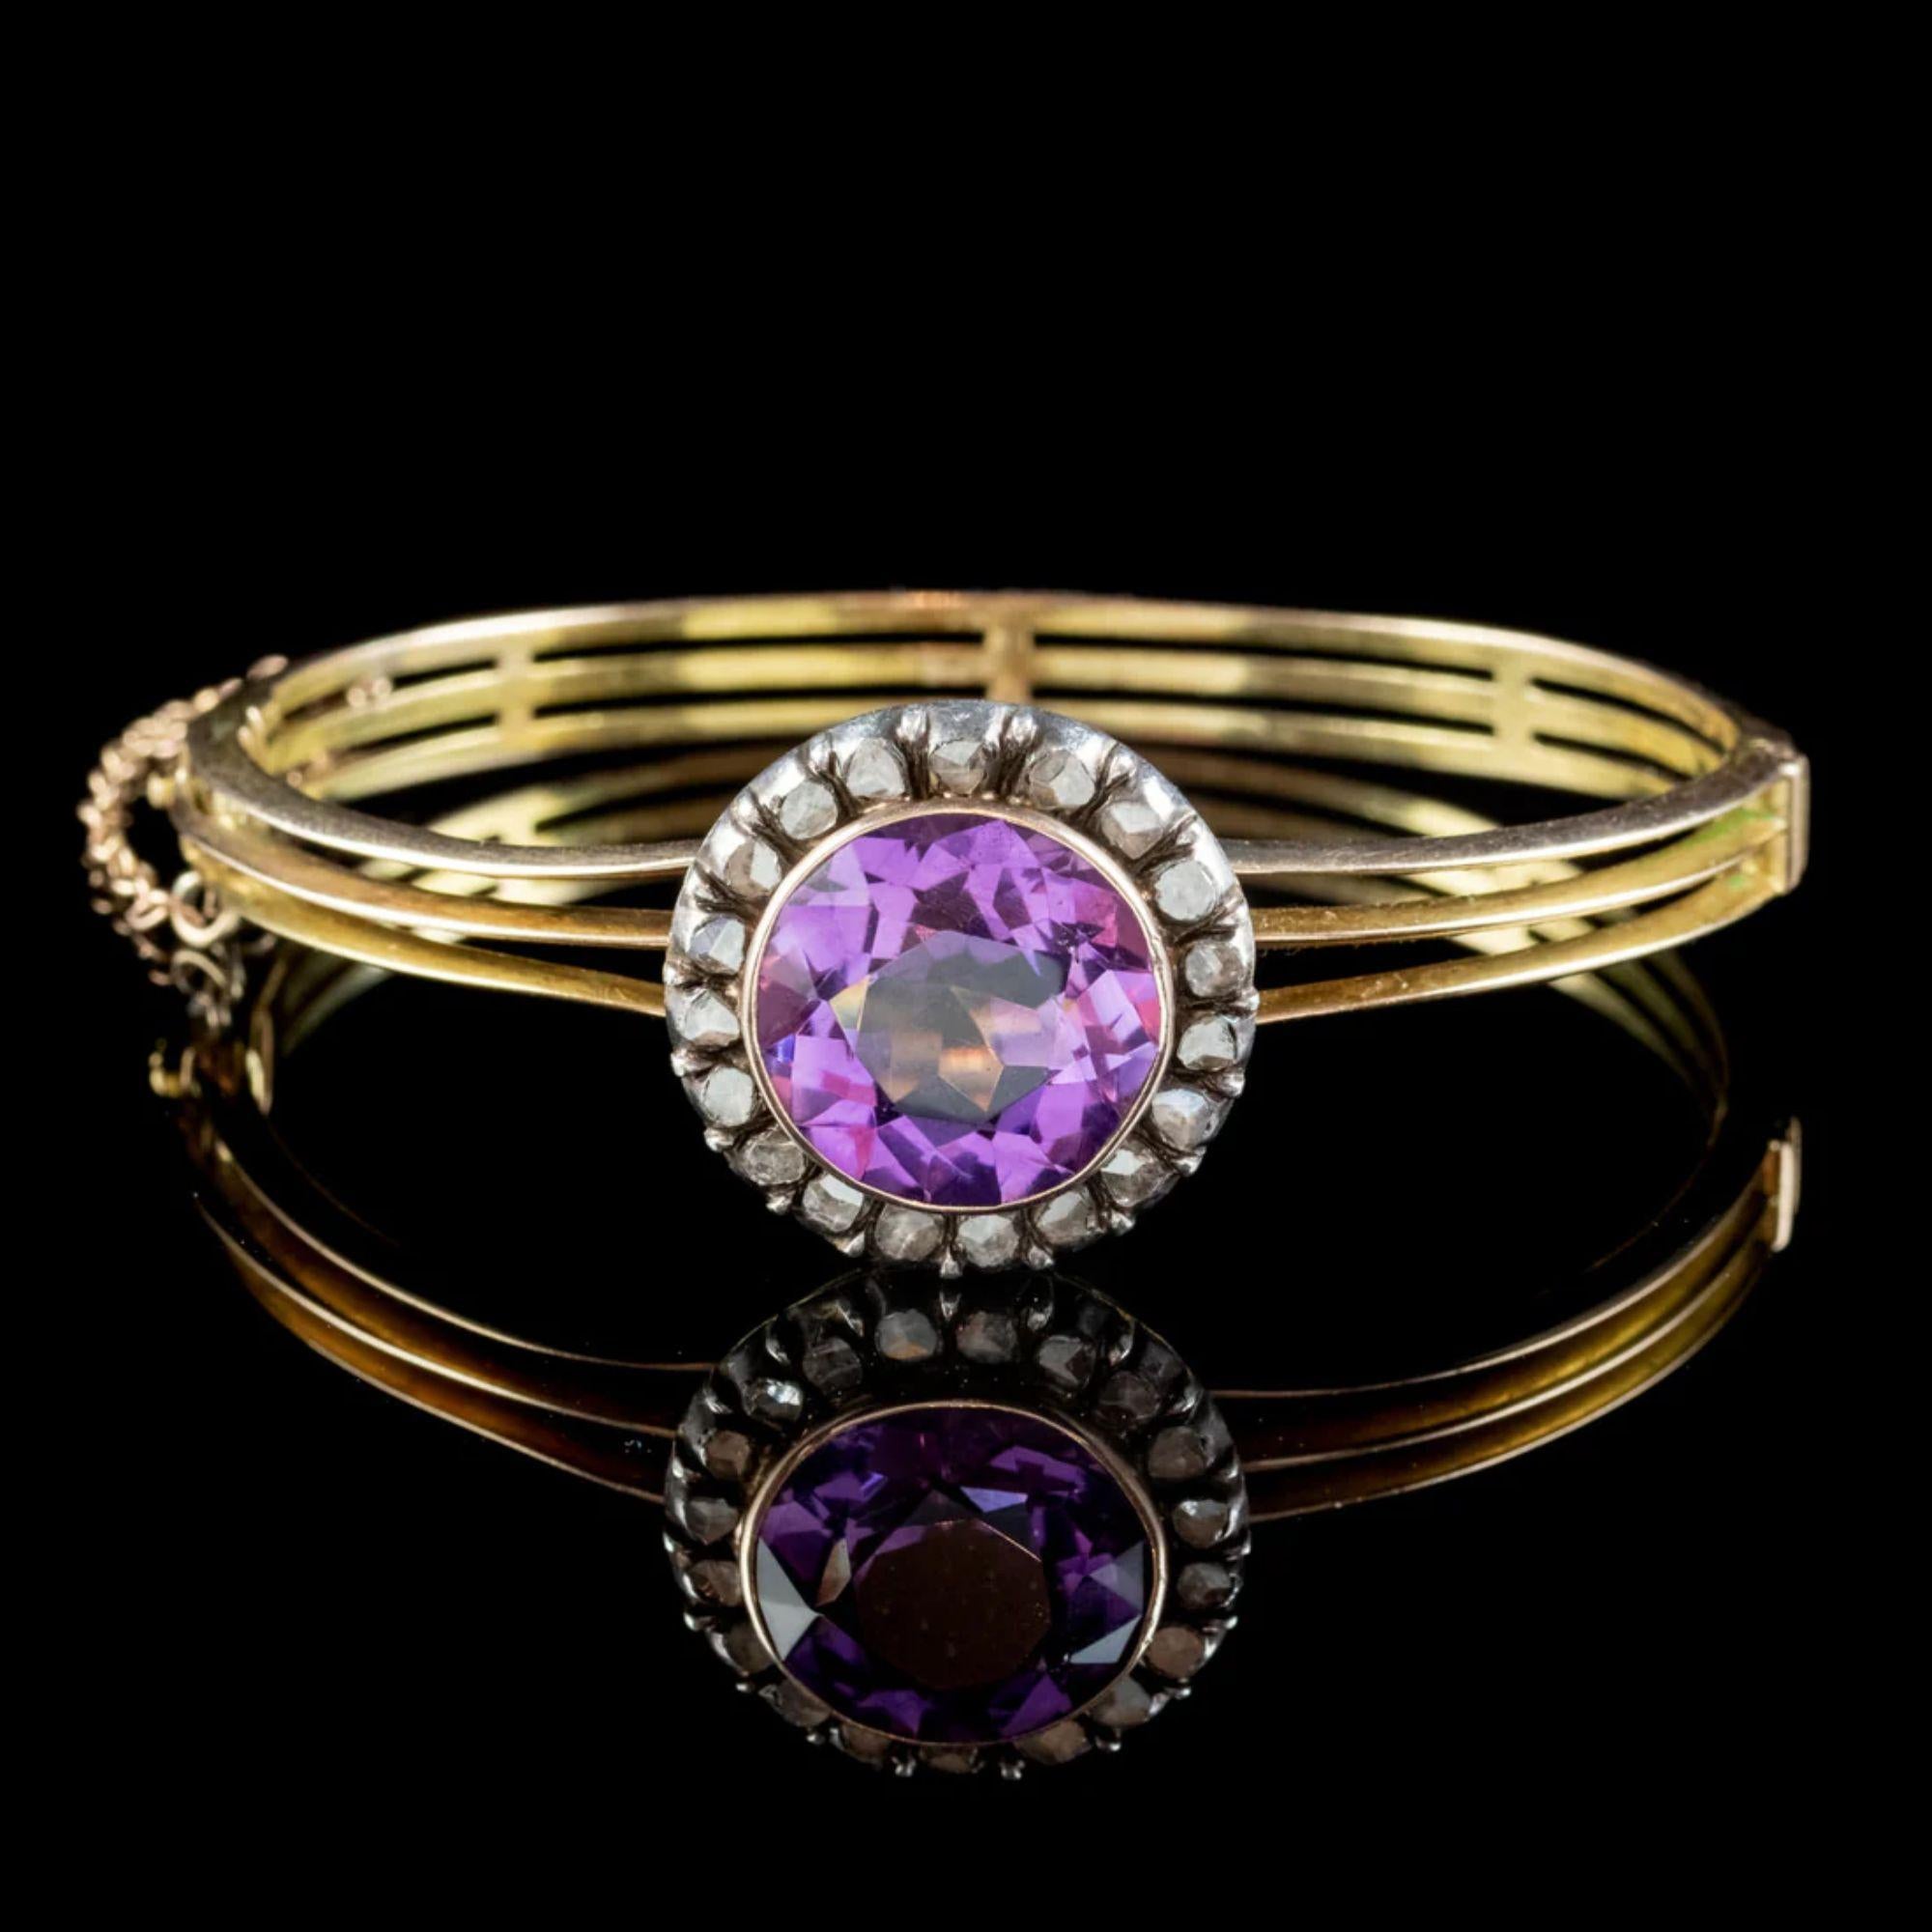 A regal Antique Victorian bangle from the late 19th Century. The band is made up of three separated 15ct Yellow Gold bands and crowned with a Silver gallery with a magnificent Amethyst on top weighing approx. 10ct with a glistening halo of Rose cut